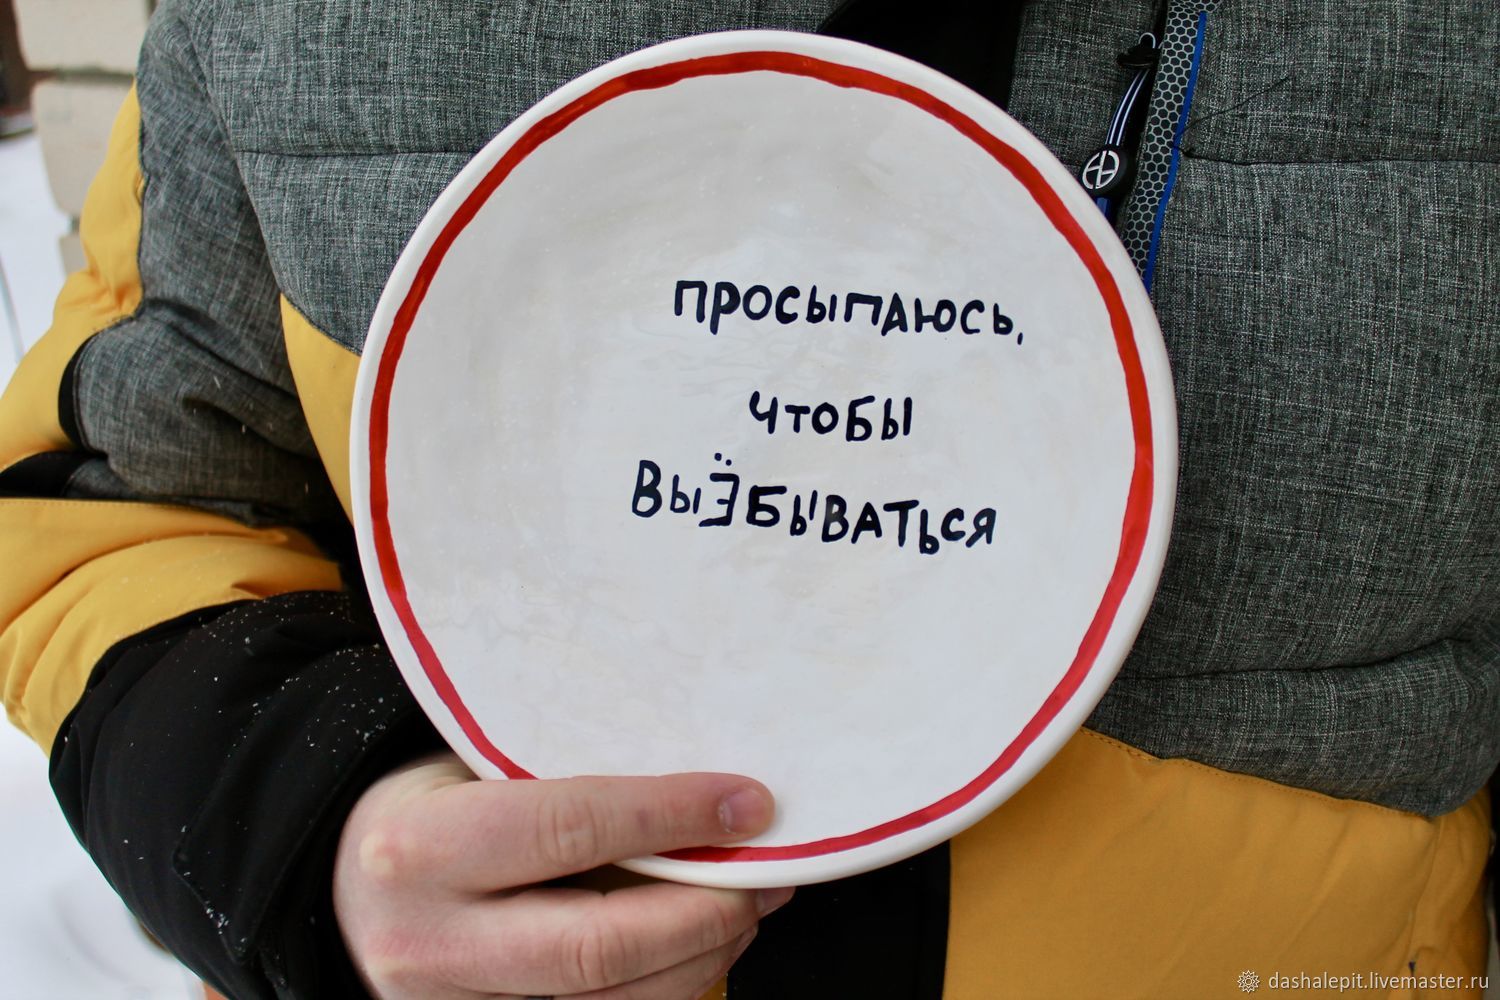 Wake up to get fucked by a Plate Gift on March 8th, Plates, Saratov,  Фото №1